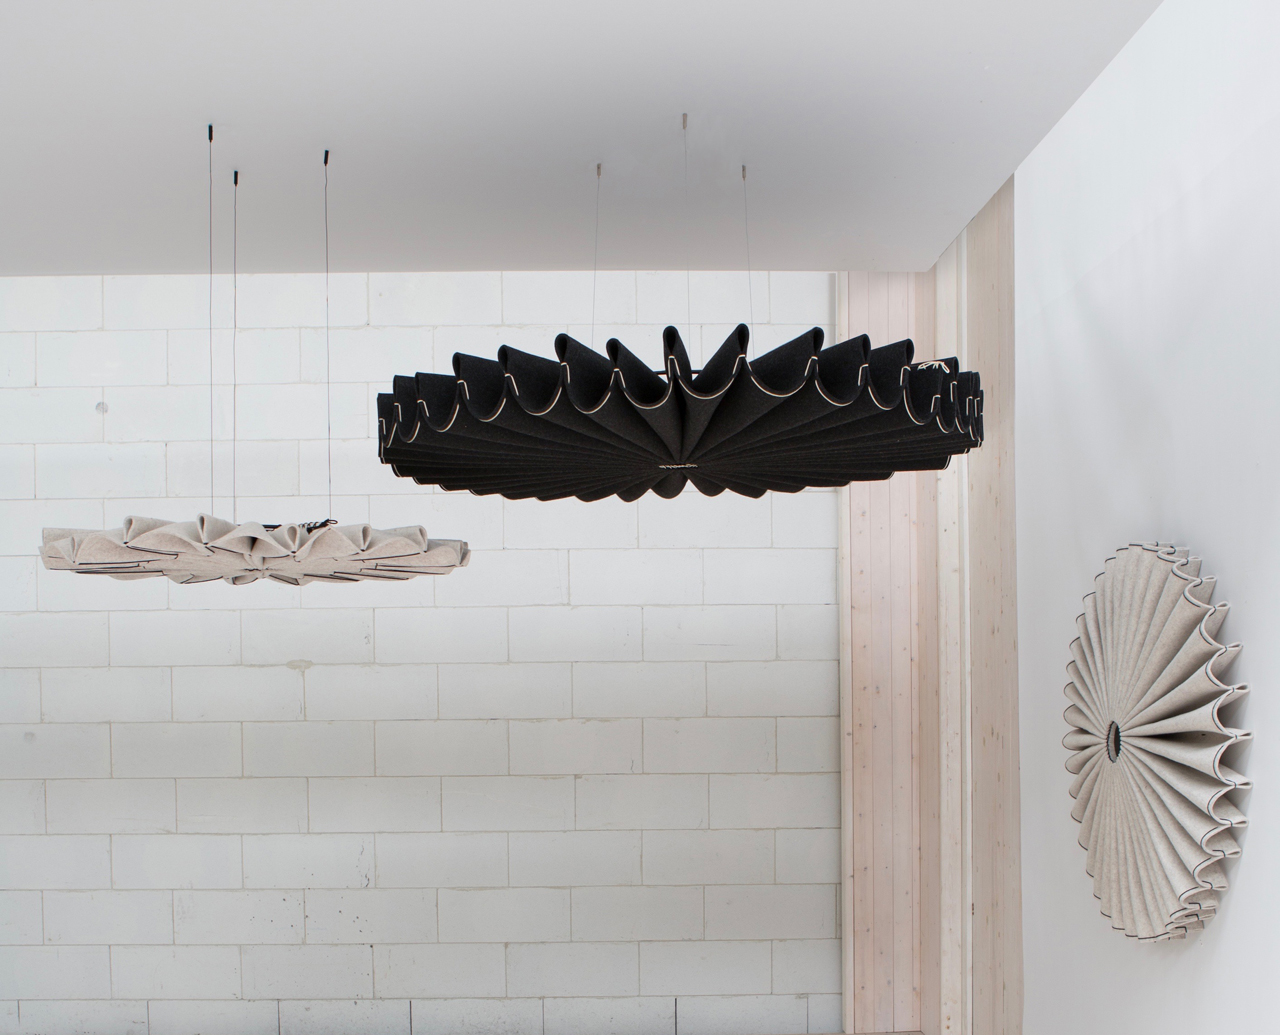 BuzziPleat: Sculptural, Sound Absorbing Forms by 13&9 Design